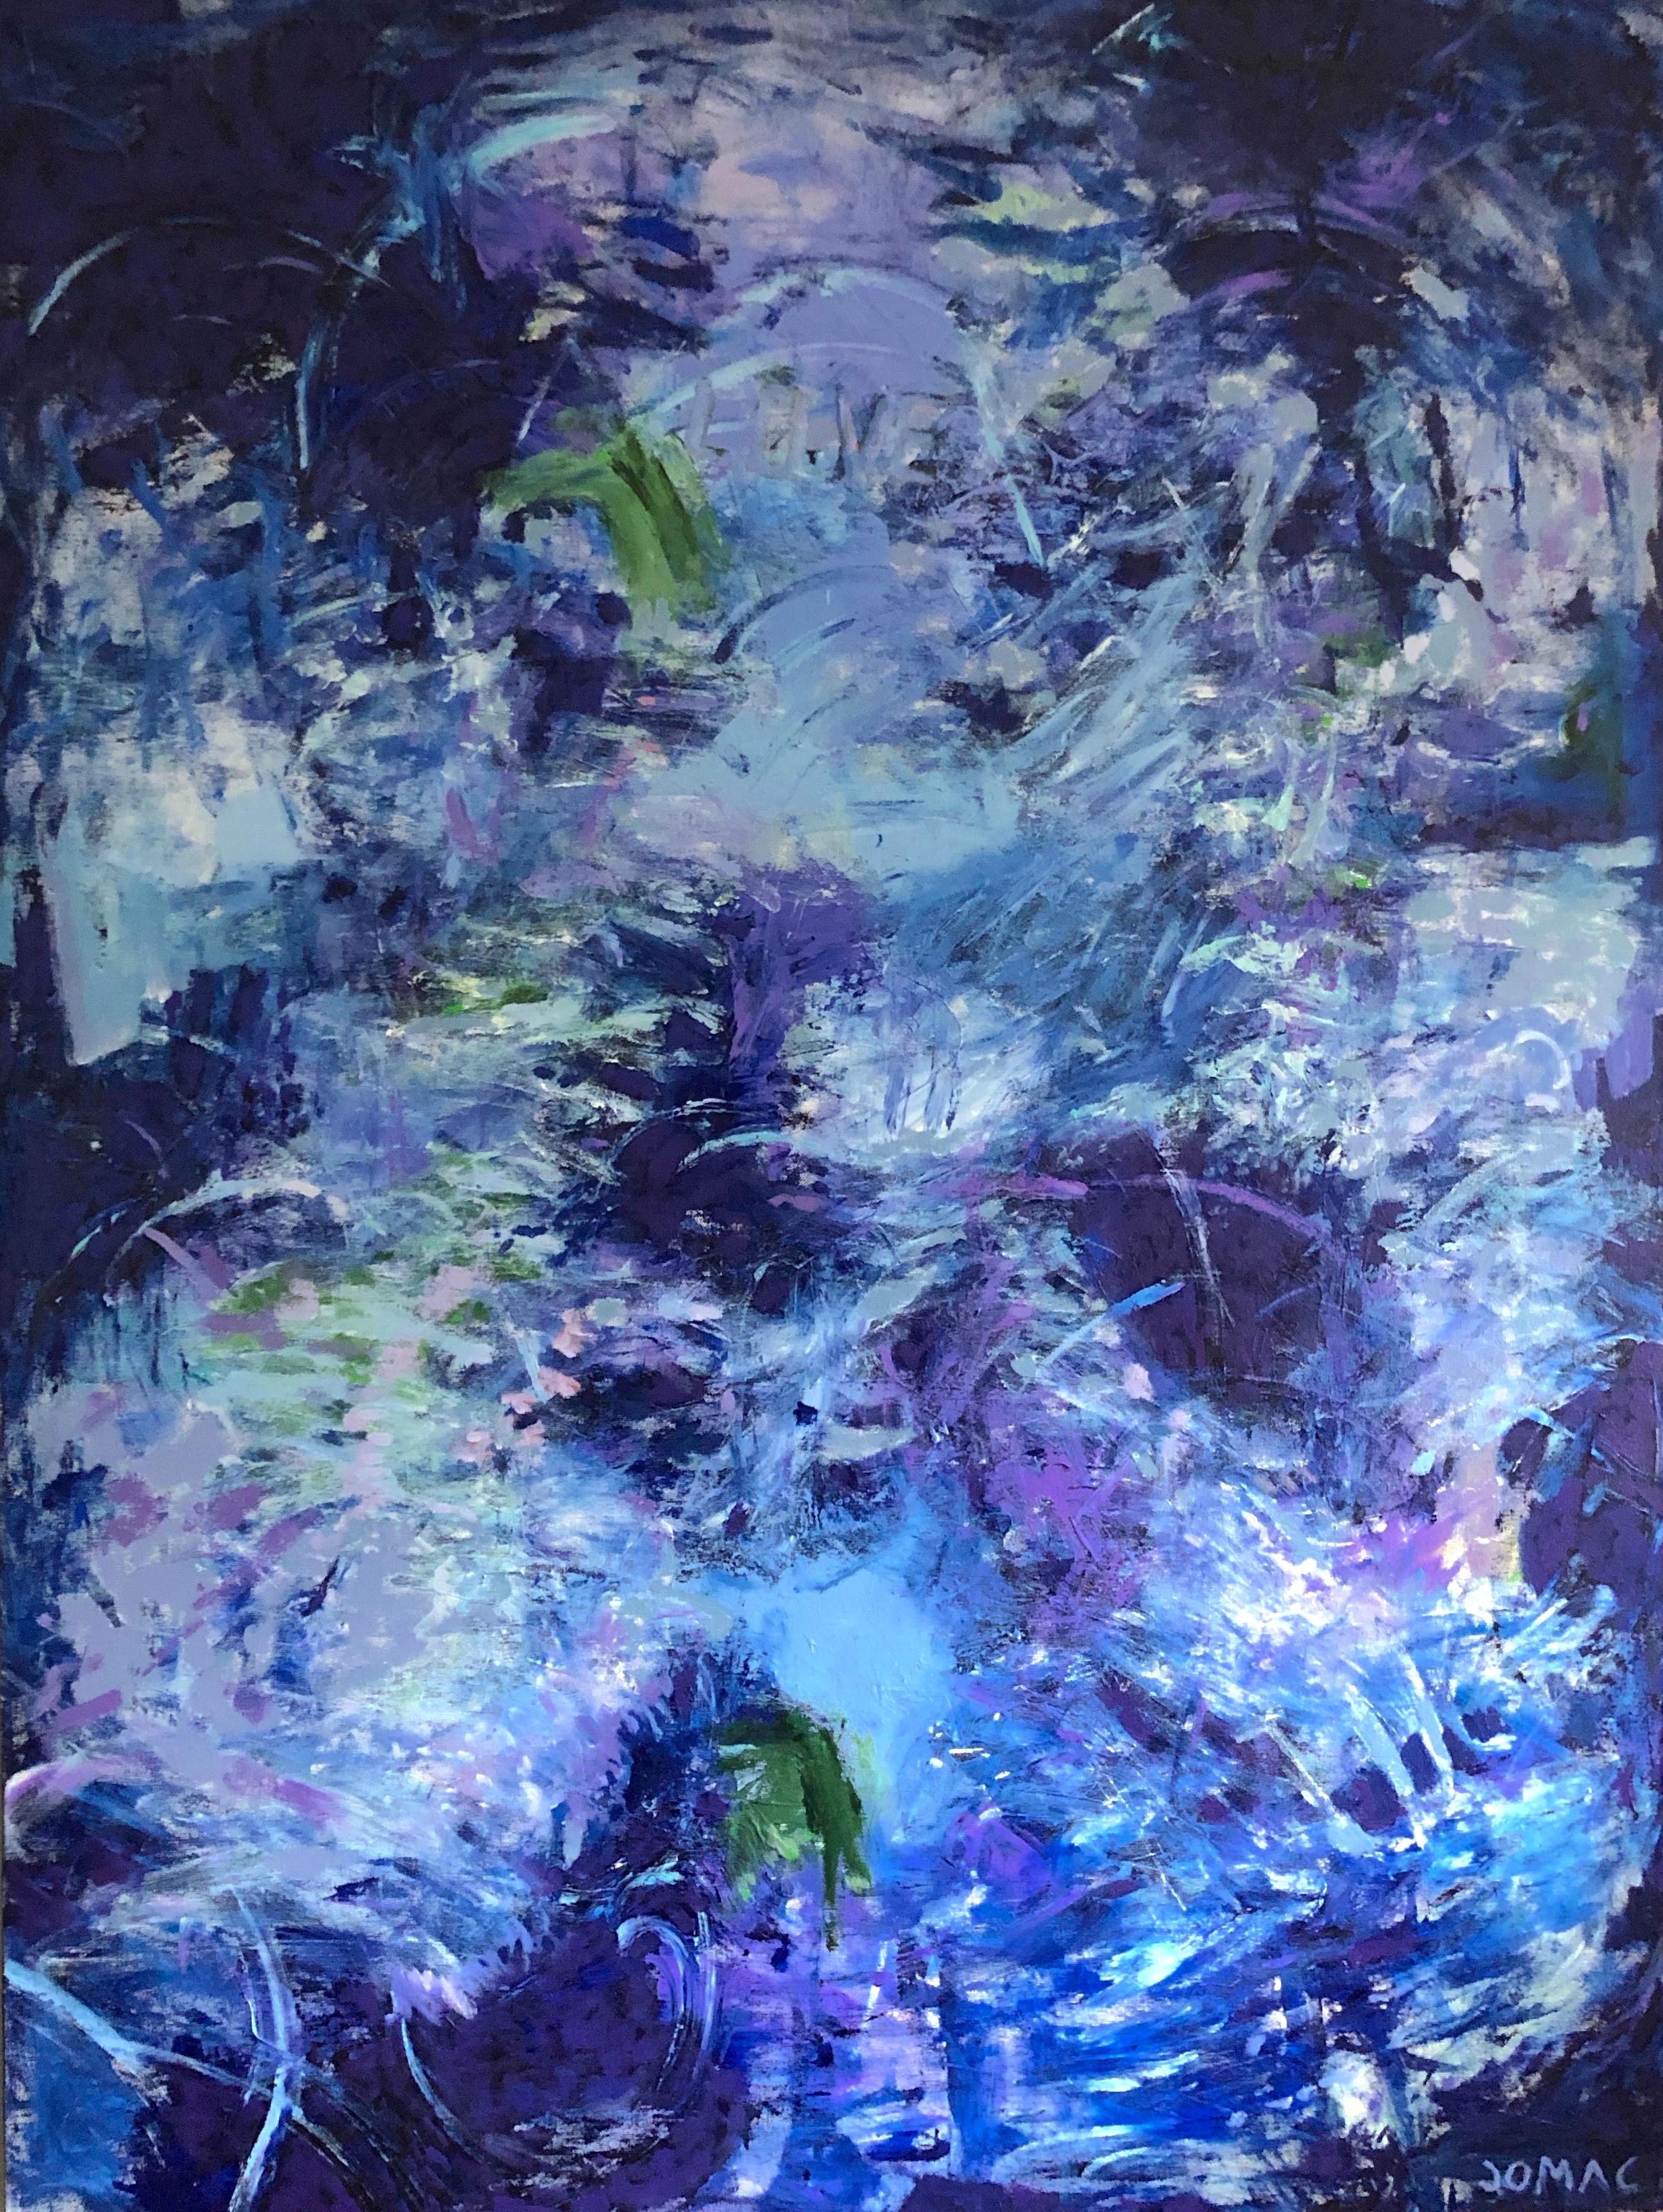 Kind of Blue: contemporary abstract AbEx painting in dark blues w/ purple, green